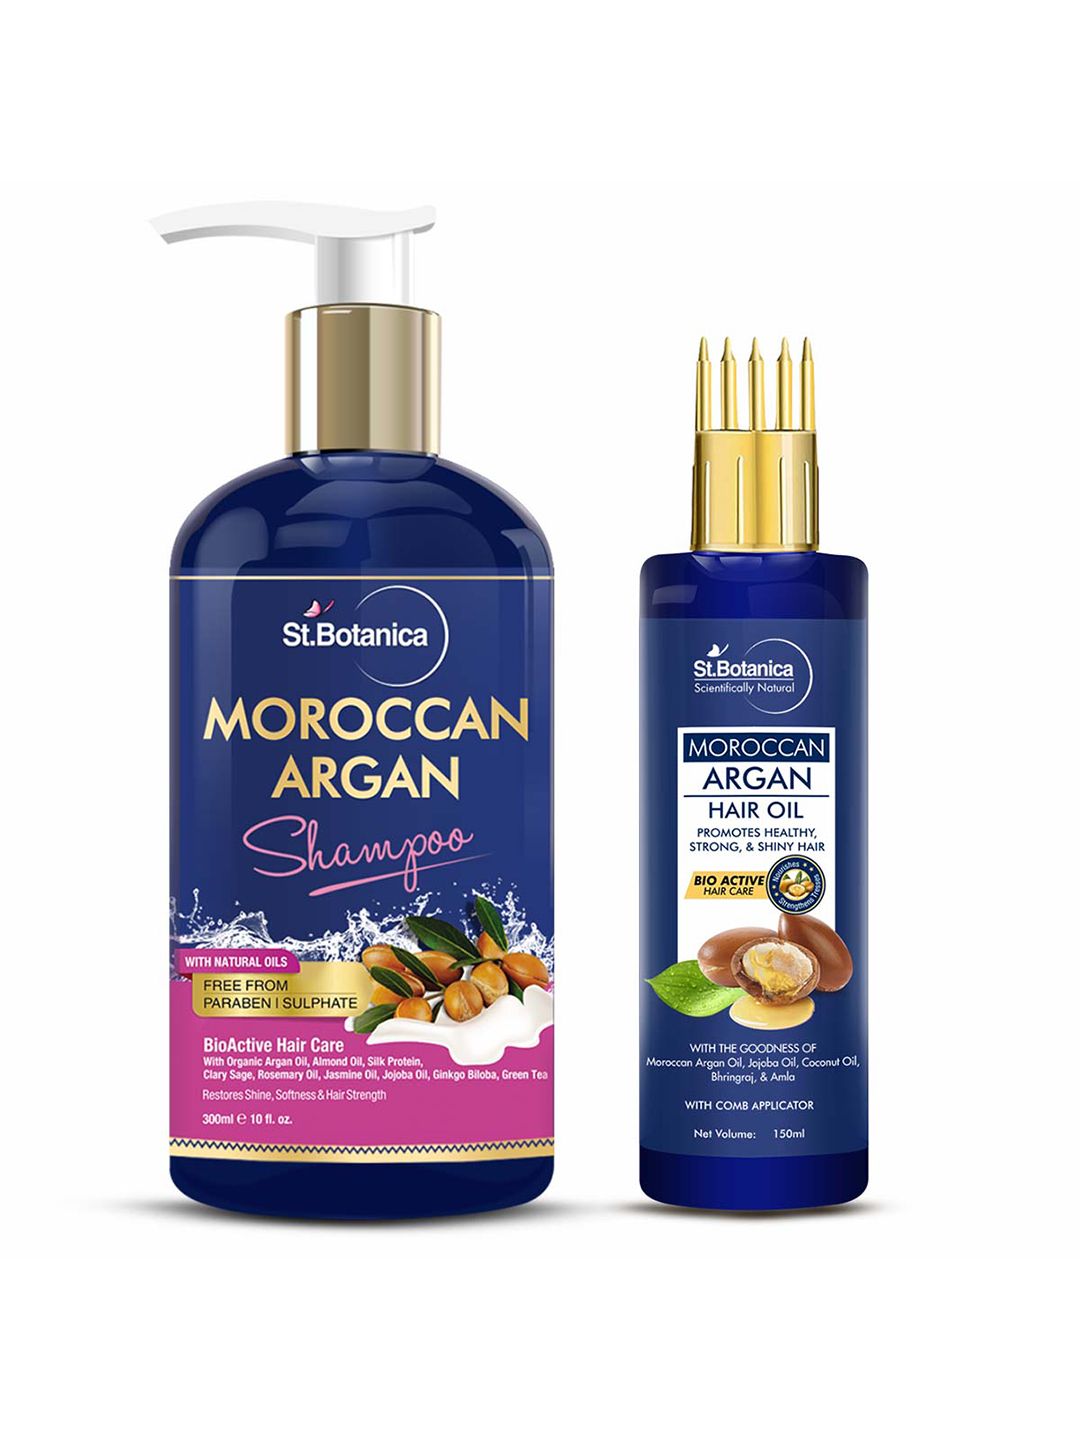 StBotanica Set of 2 Moroccan Argan Shampoo + Argan Hair Oil With Comb Applicator Price in India